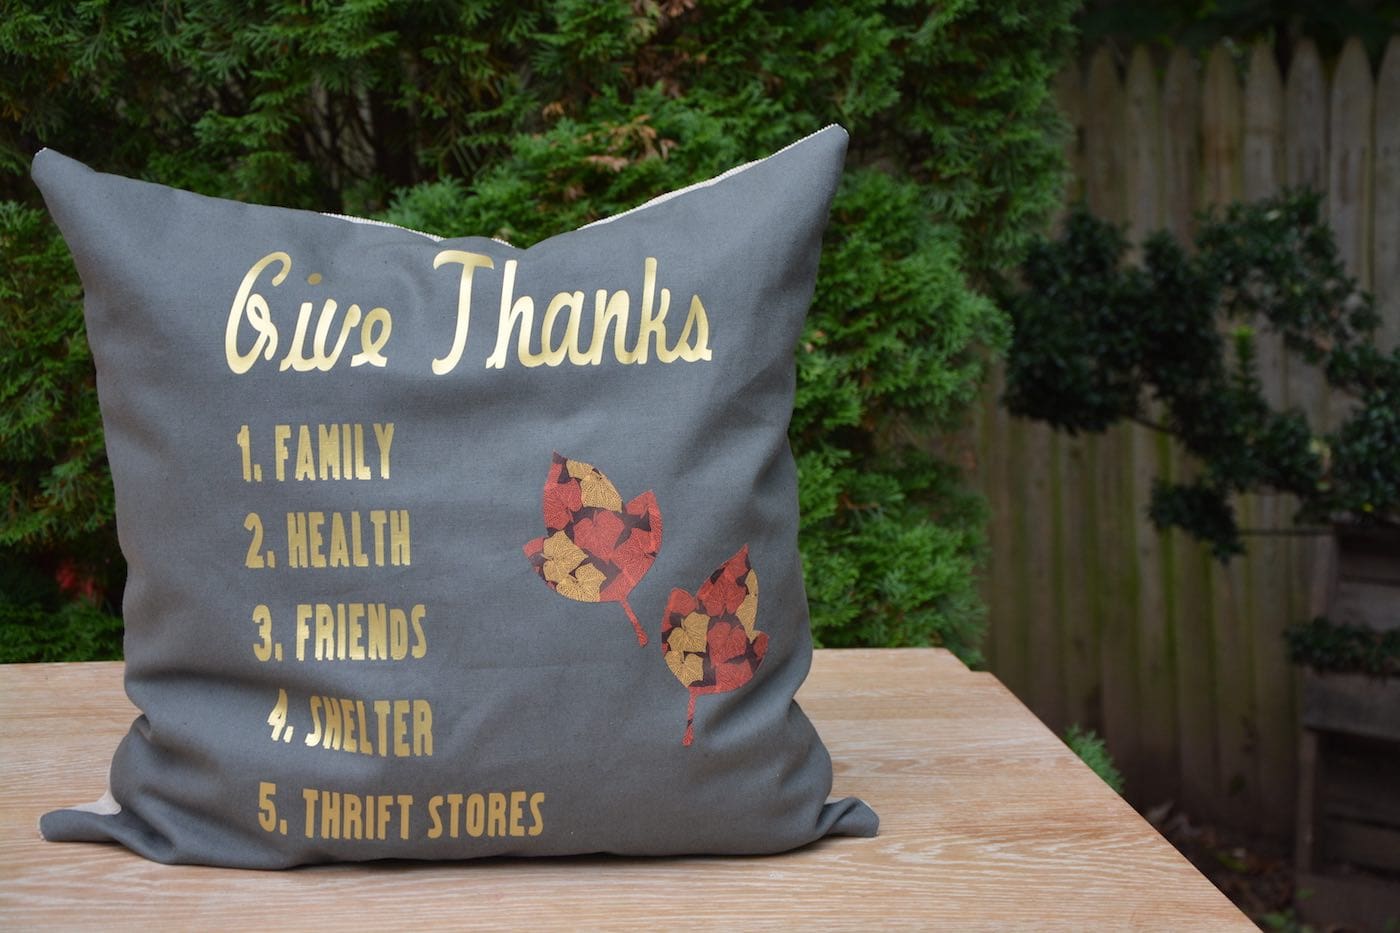 How to sew an iron-on DIY pillow for Thanksgiving - I am thankful for family, health, friends, shelter, and thrift stores! - Thrift Diving